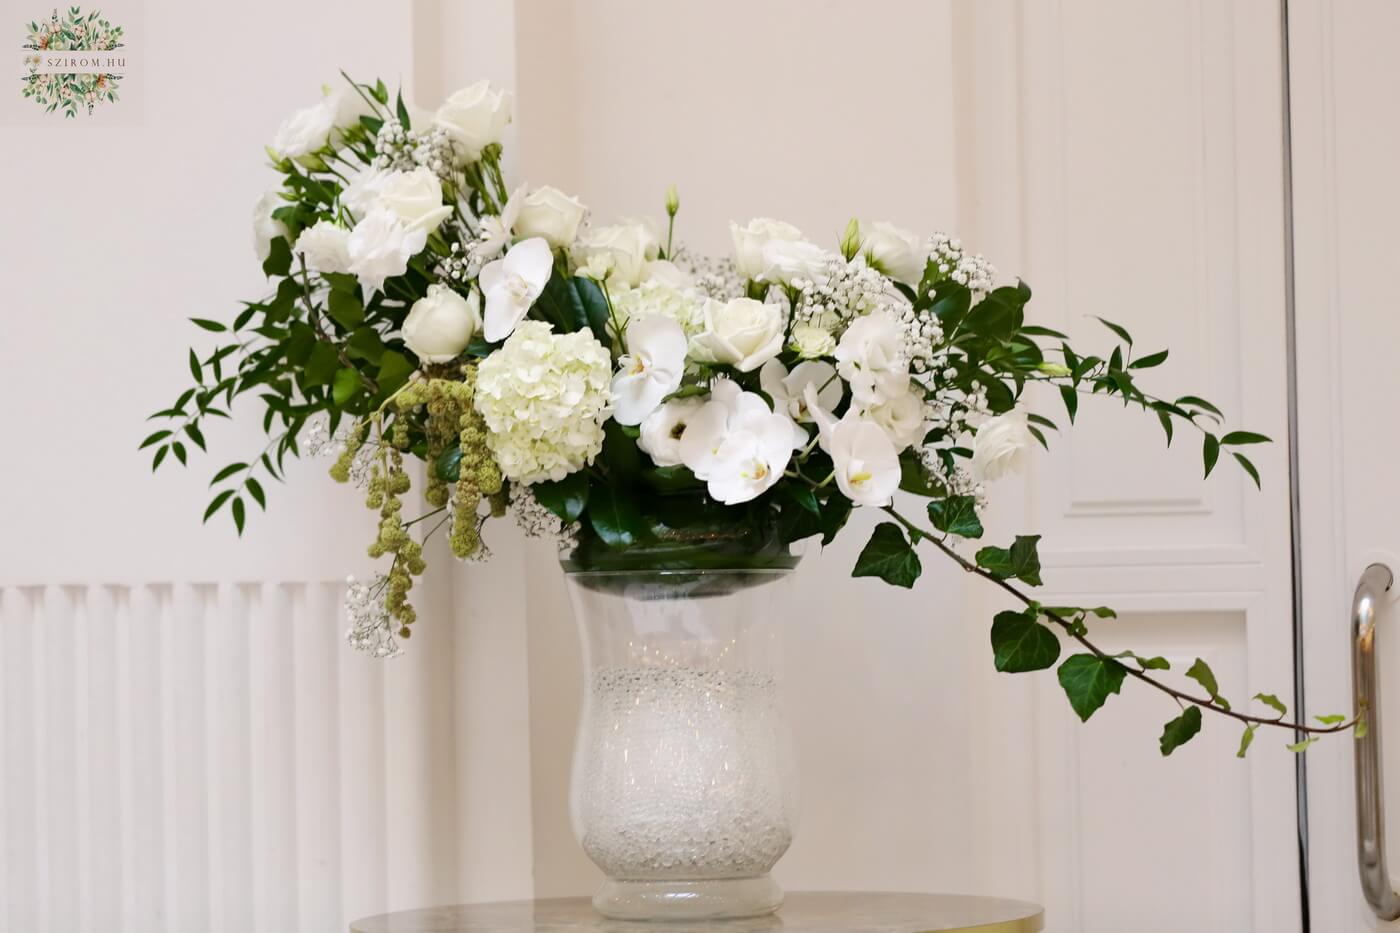 flower delivery Budapest - crescent moon shaped arrangement (white orchid, rose, lisianthus) wedding Gerbeaud